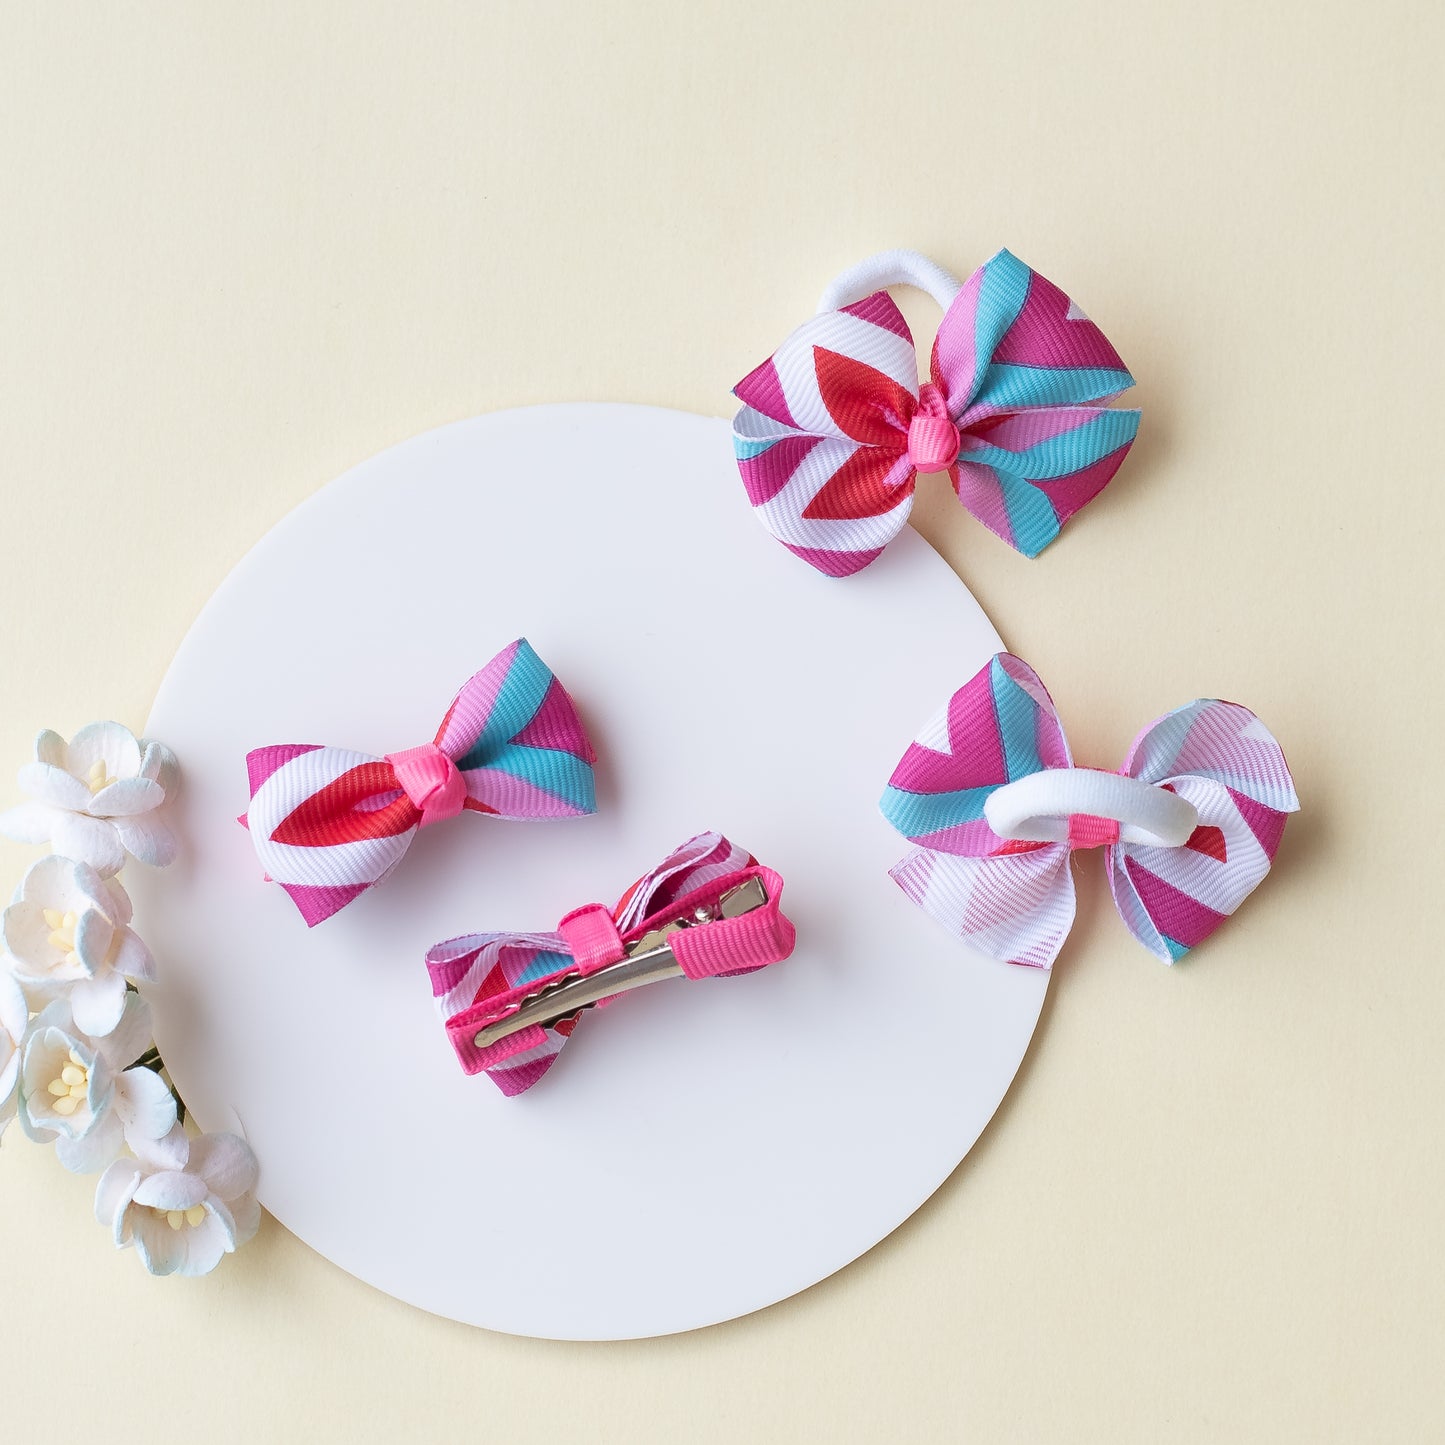 Combo: Chevron print small bow on alligator clips and matching small rubberbands - Blue, Pink, White